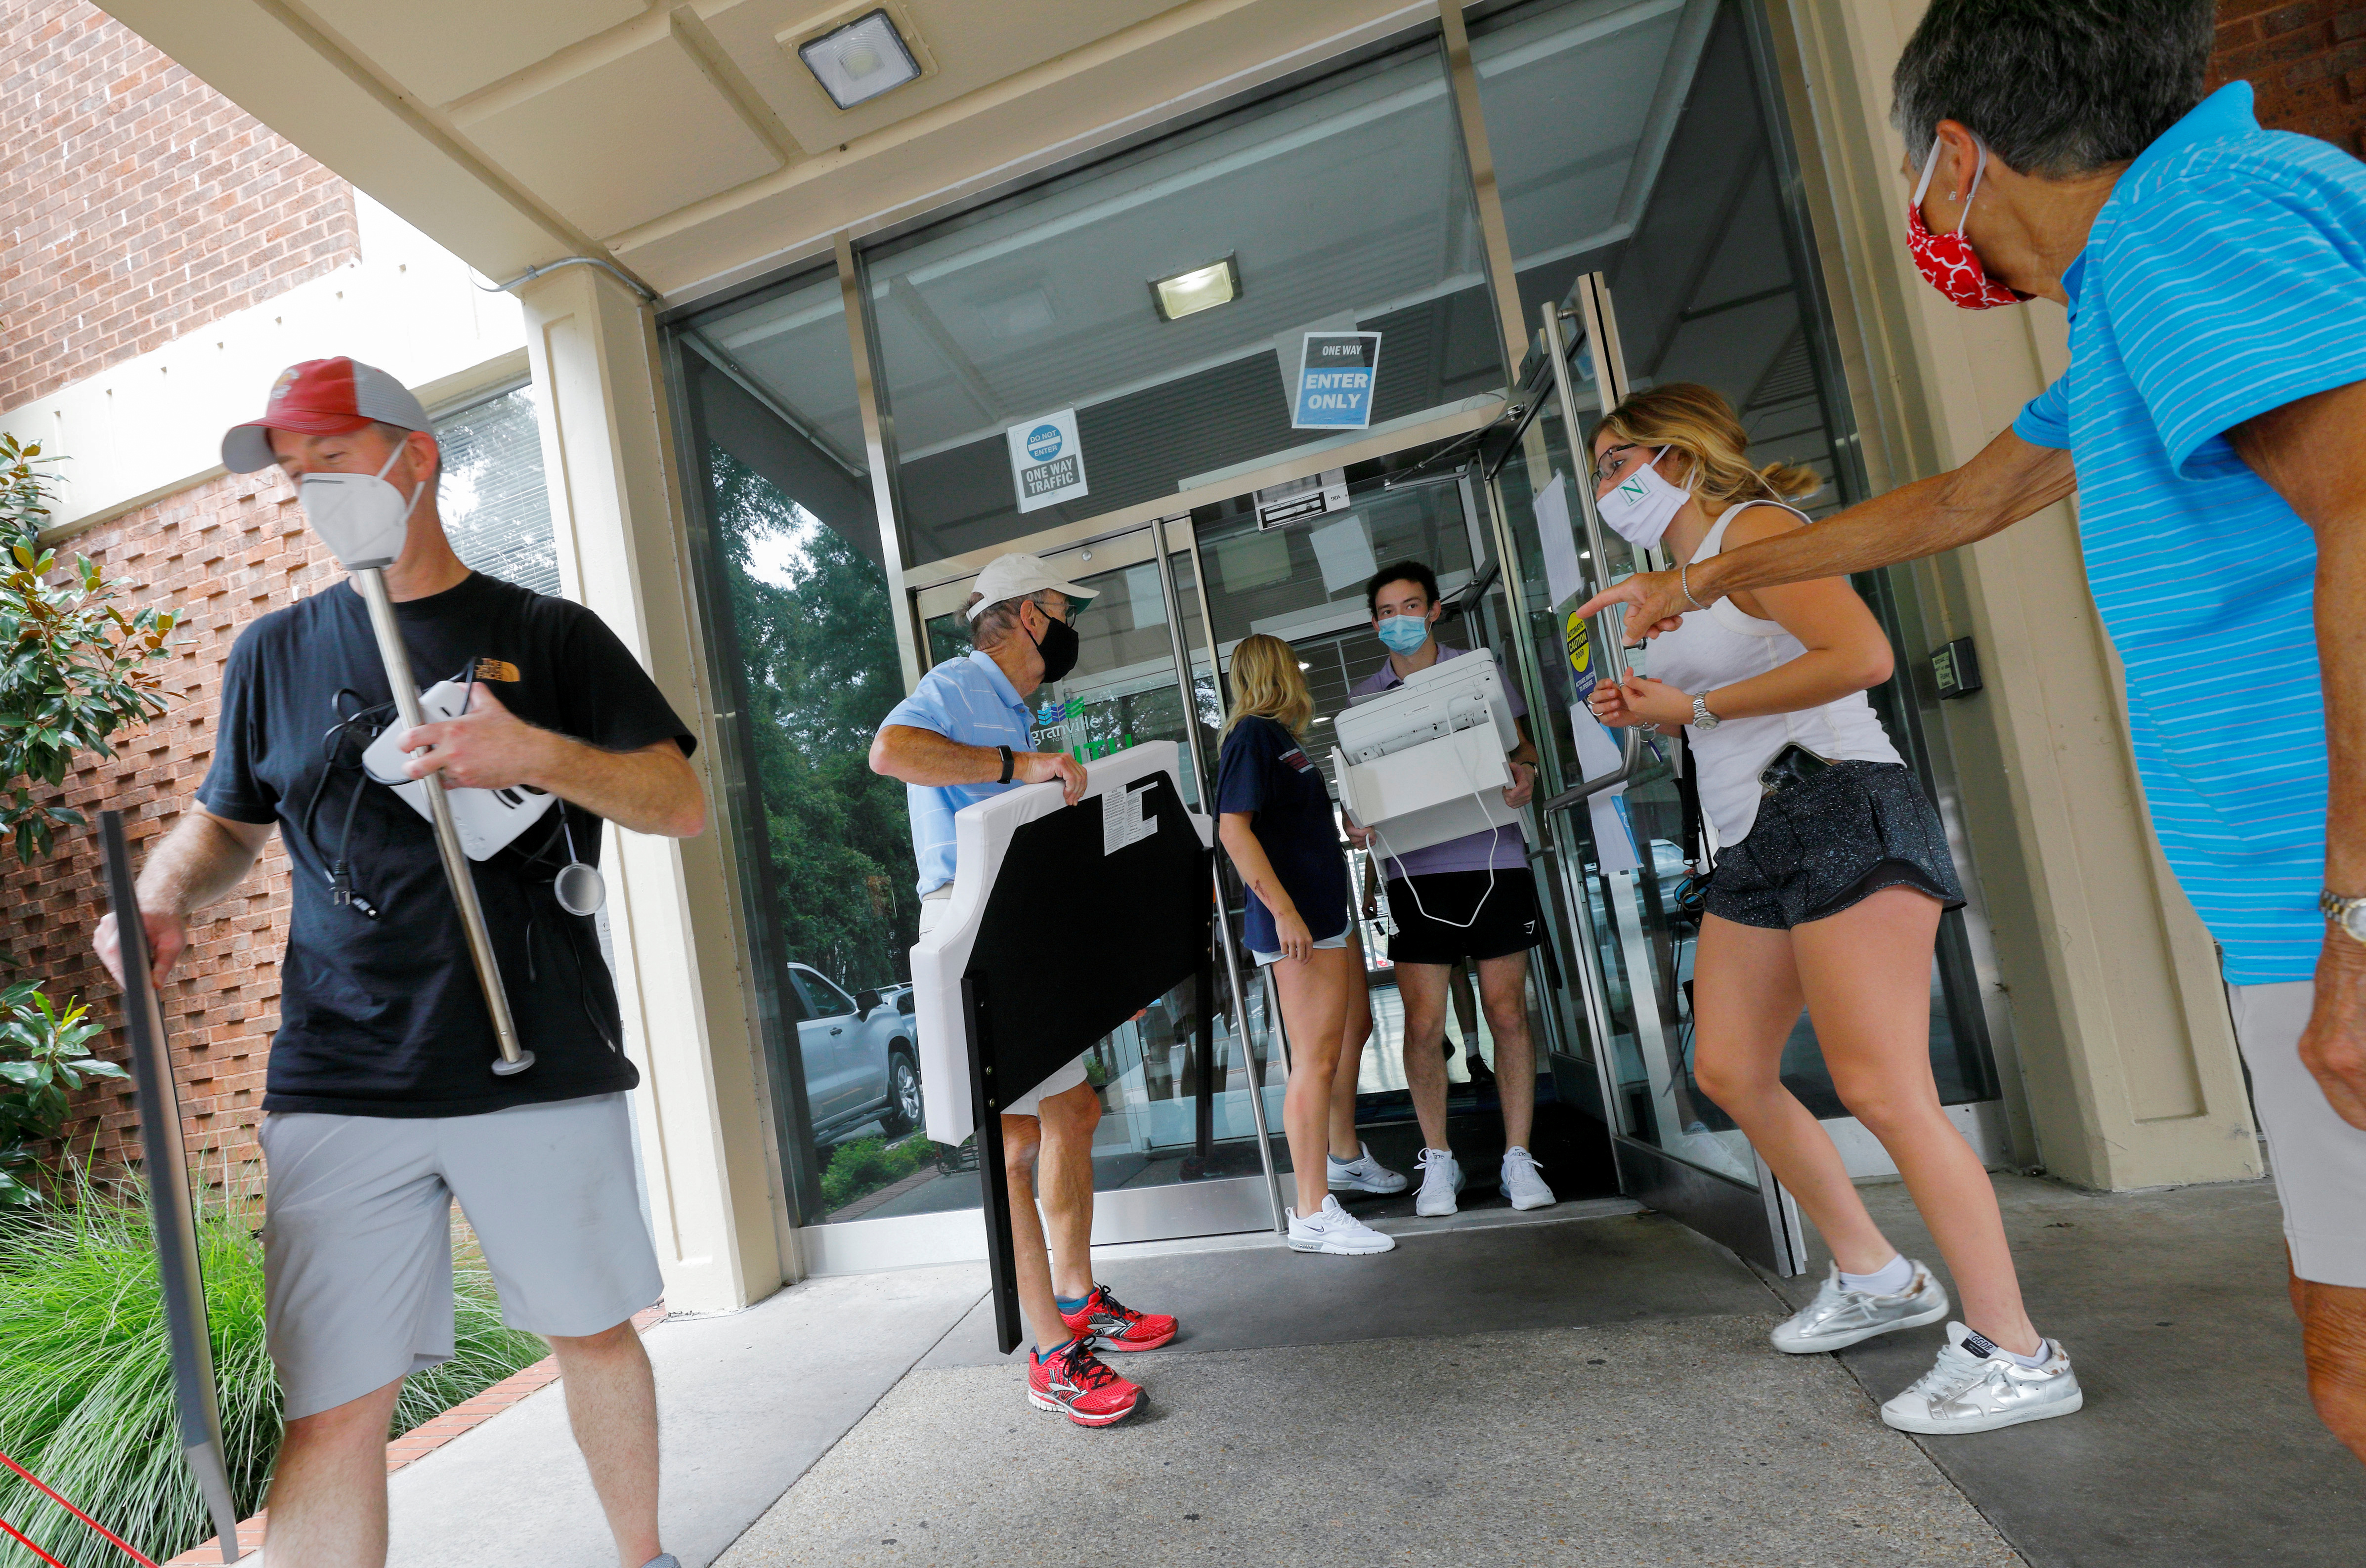 Family members assist students complying with a requirement by the University of North Carolina to move out of campus housing due to the coronavirus disease (COVID-19) outbreak in Chapel Hill, North Carolina, U.S. August 30, 2020. REUTERS/Jonathan Drake